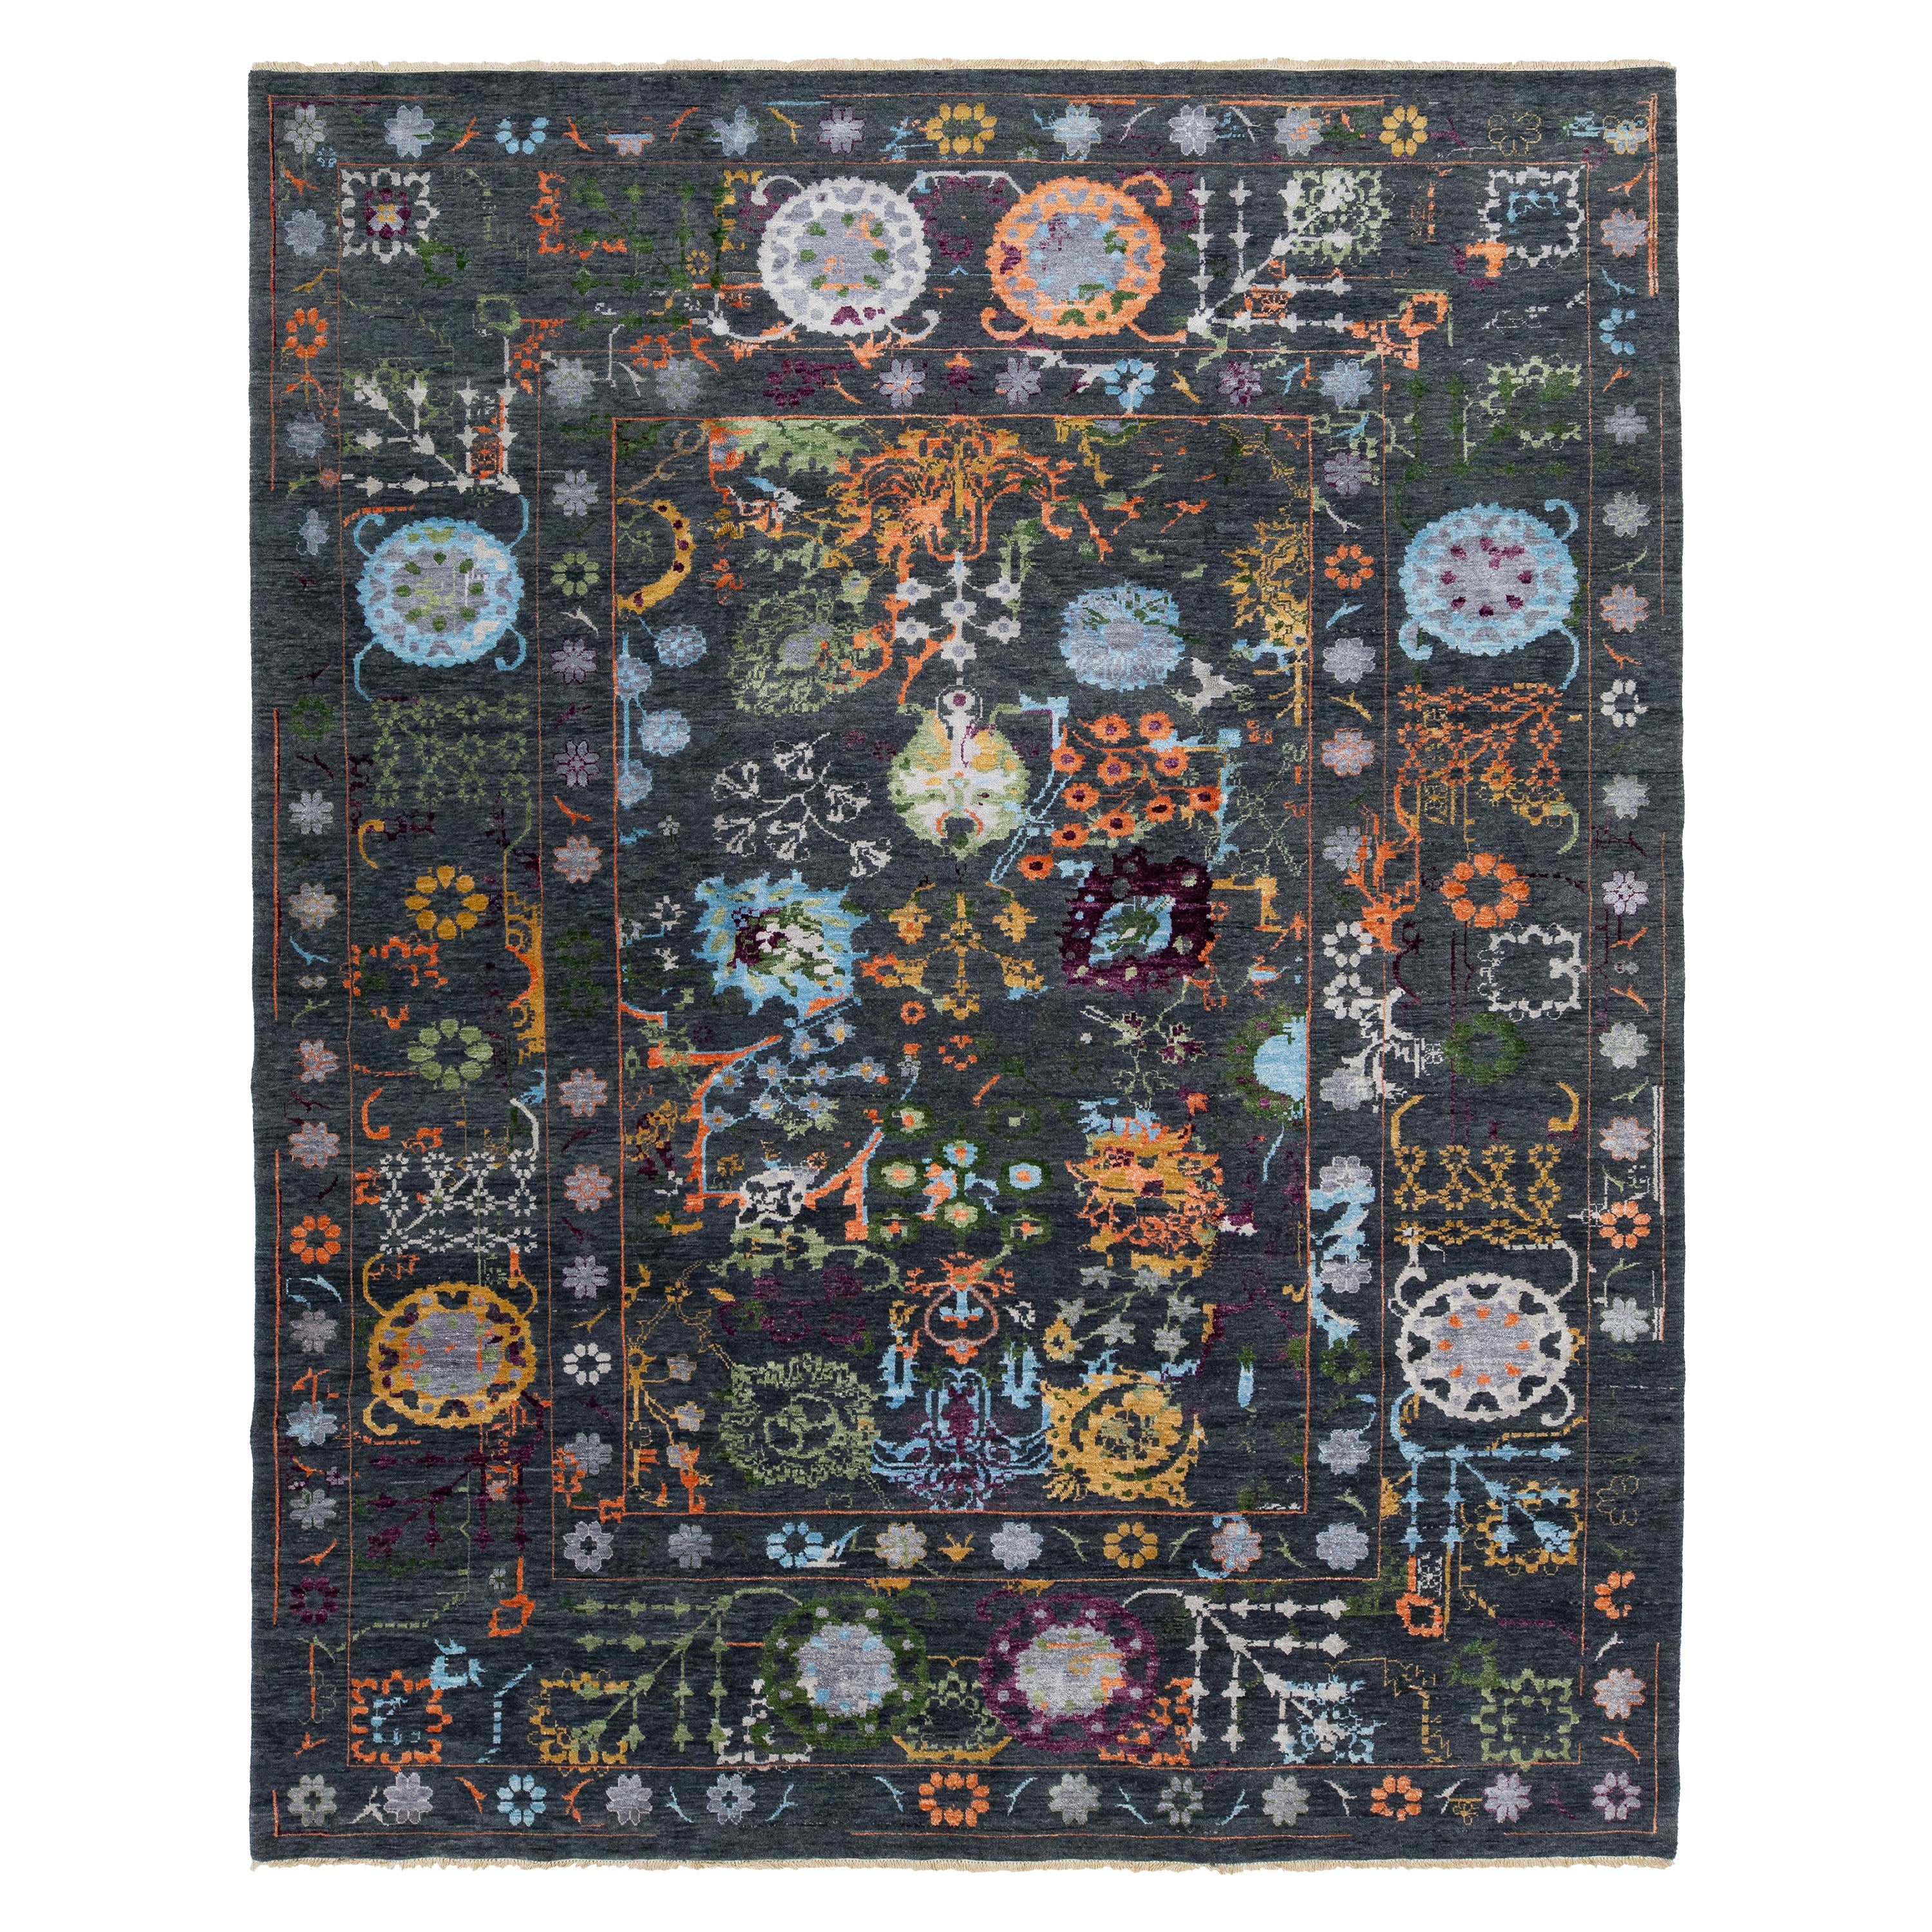  Contemporary Transitional Handmade Wool Rug with Floral Motif In Charcoal   For Sale